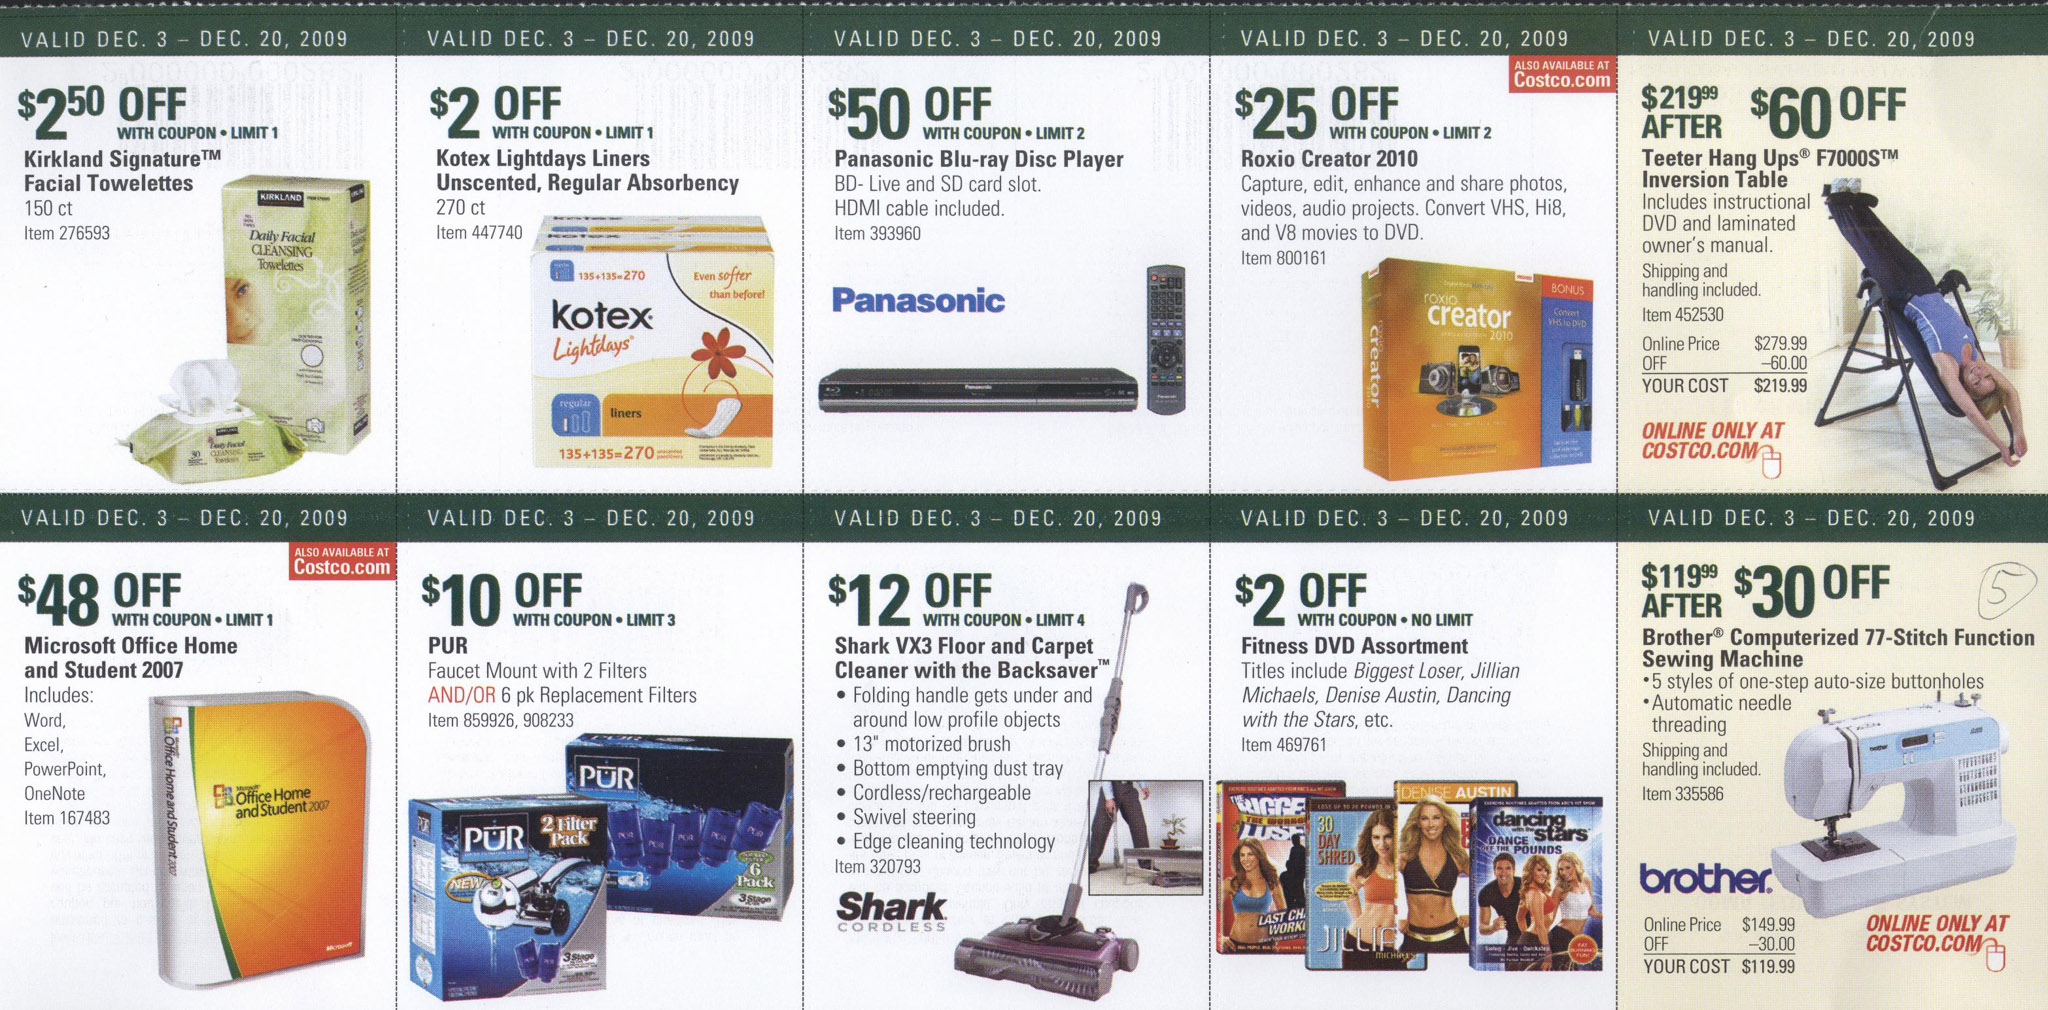 Coupon book page 5 in full-size.